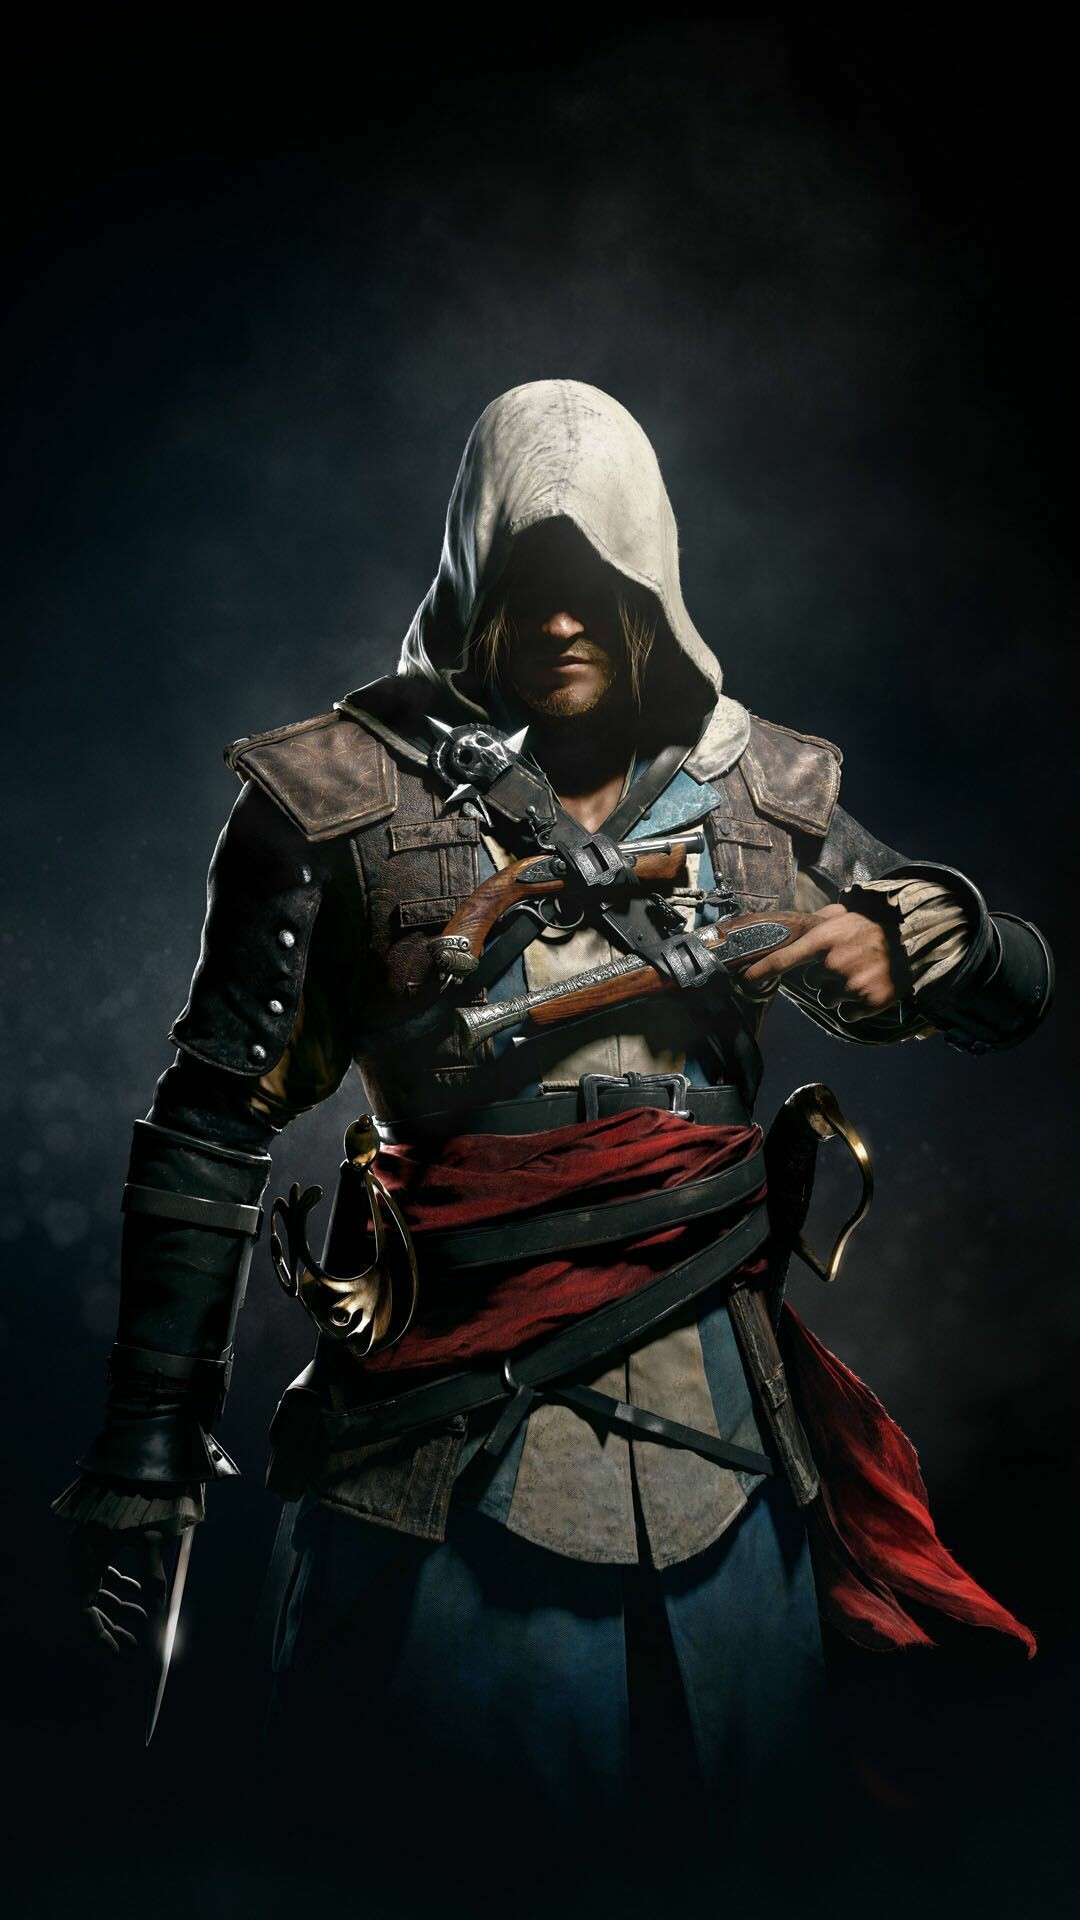 Assassin's Creed: Edward Kenway, A fictional character in Ubisoft's video game franchise. 1080x1920 Full HD Wallpaper.